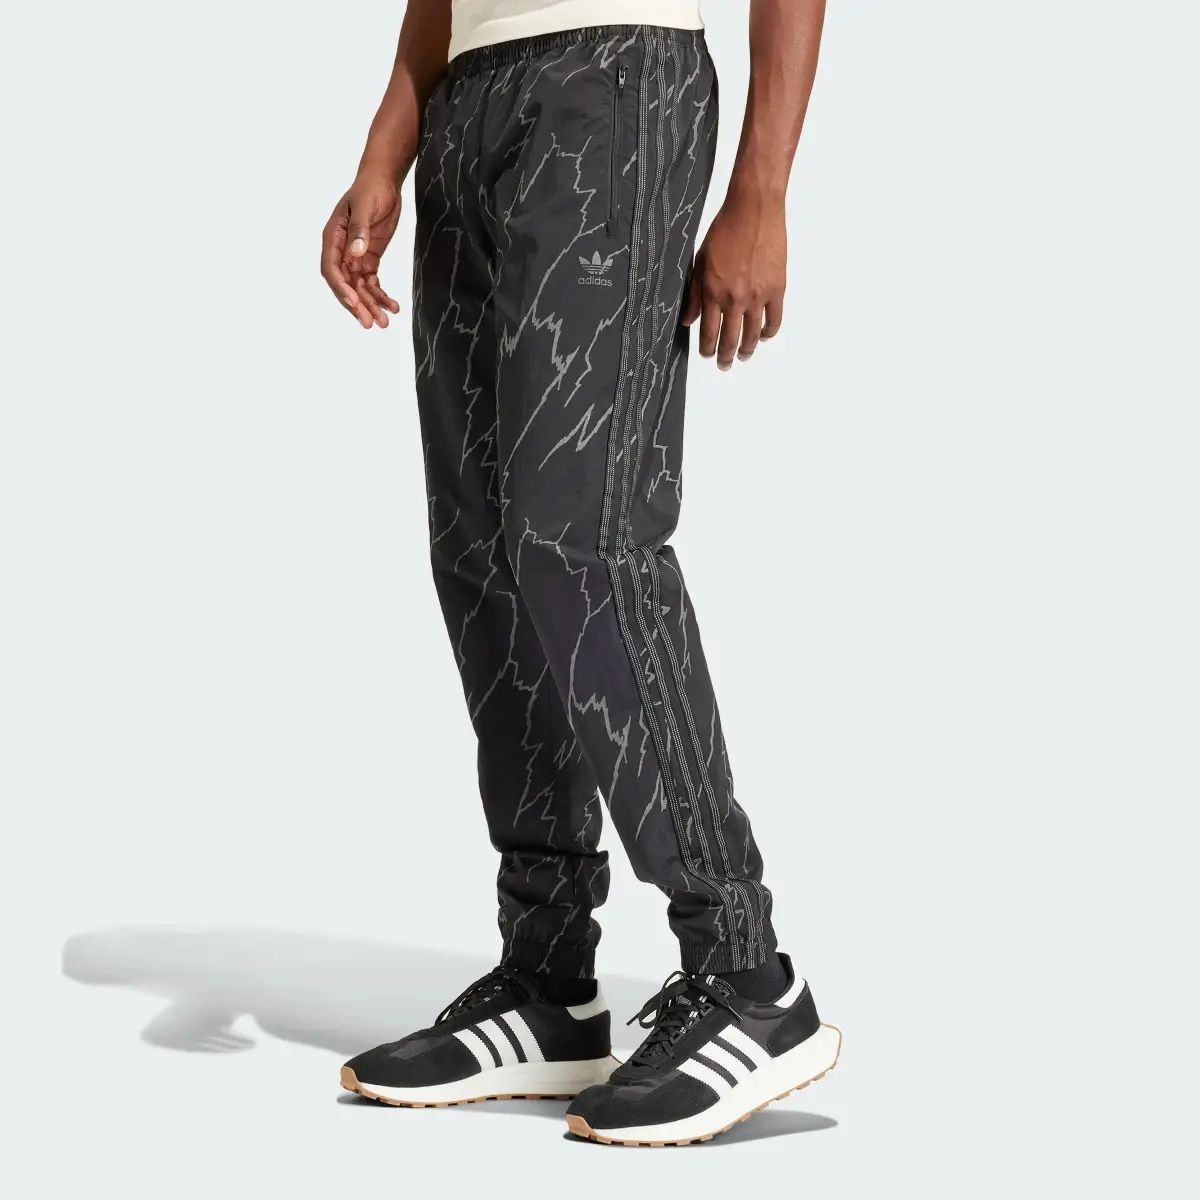 Adidas Allover Print SST Track Tracksuit Bottoms. 1